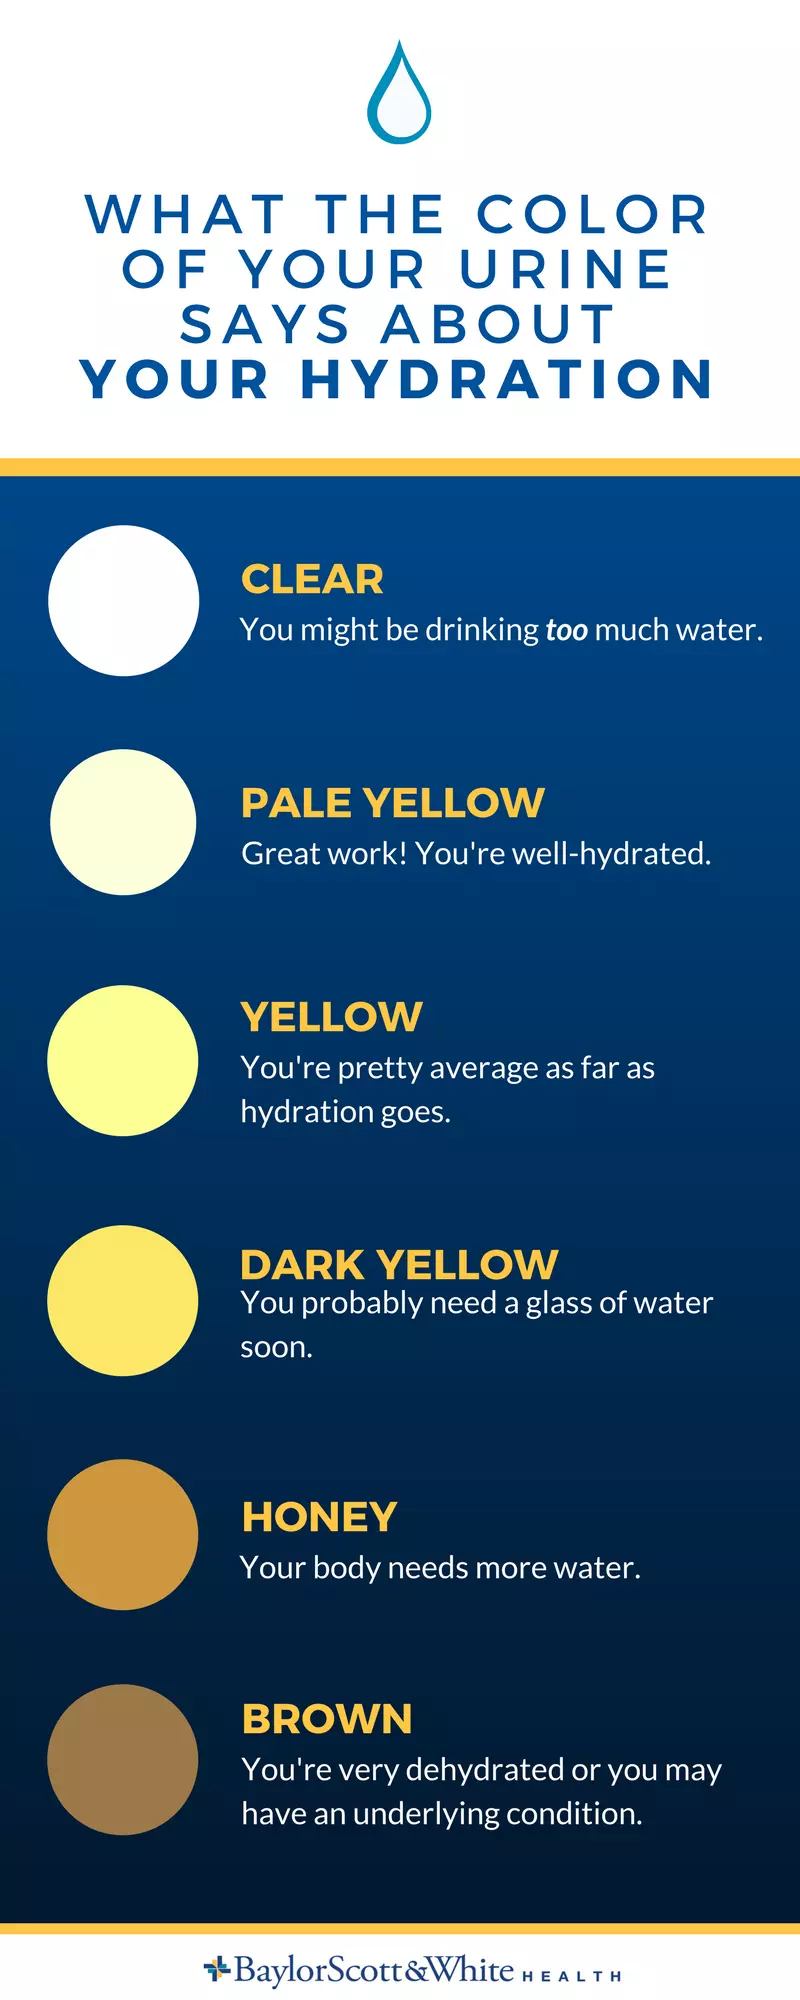 What the color of your urine says about your hydration